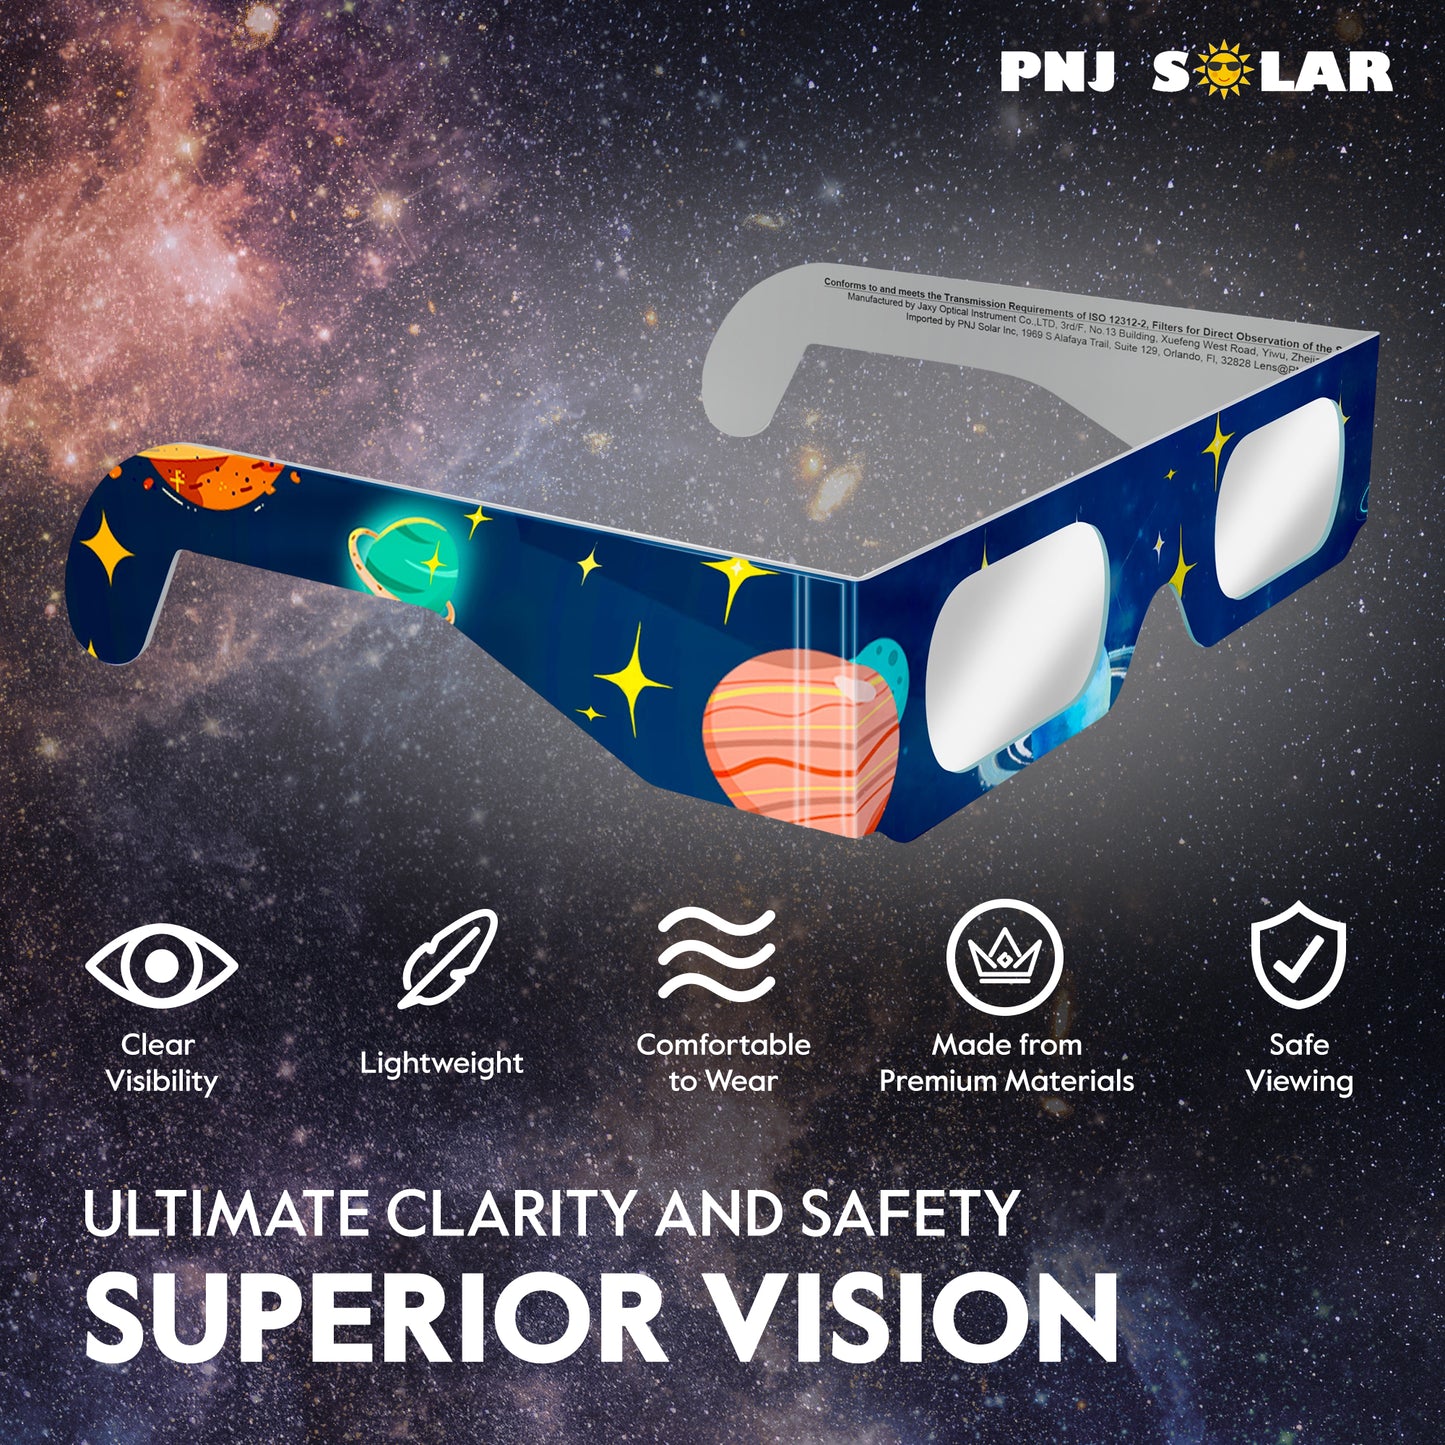 10 Pack - Solar Eclipse Glasses - ISO Certified - AAS Approved